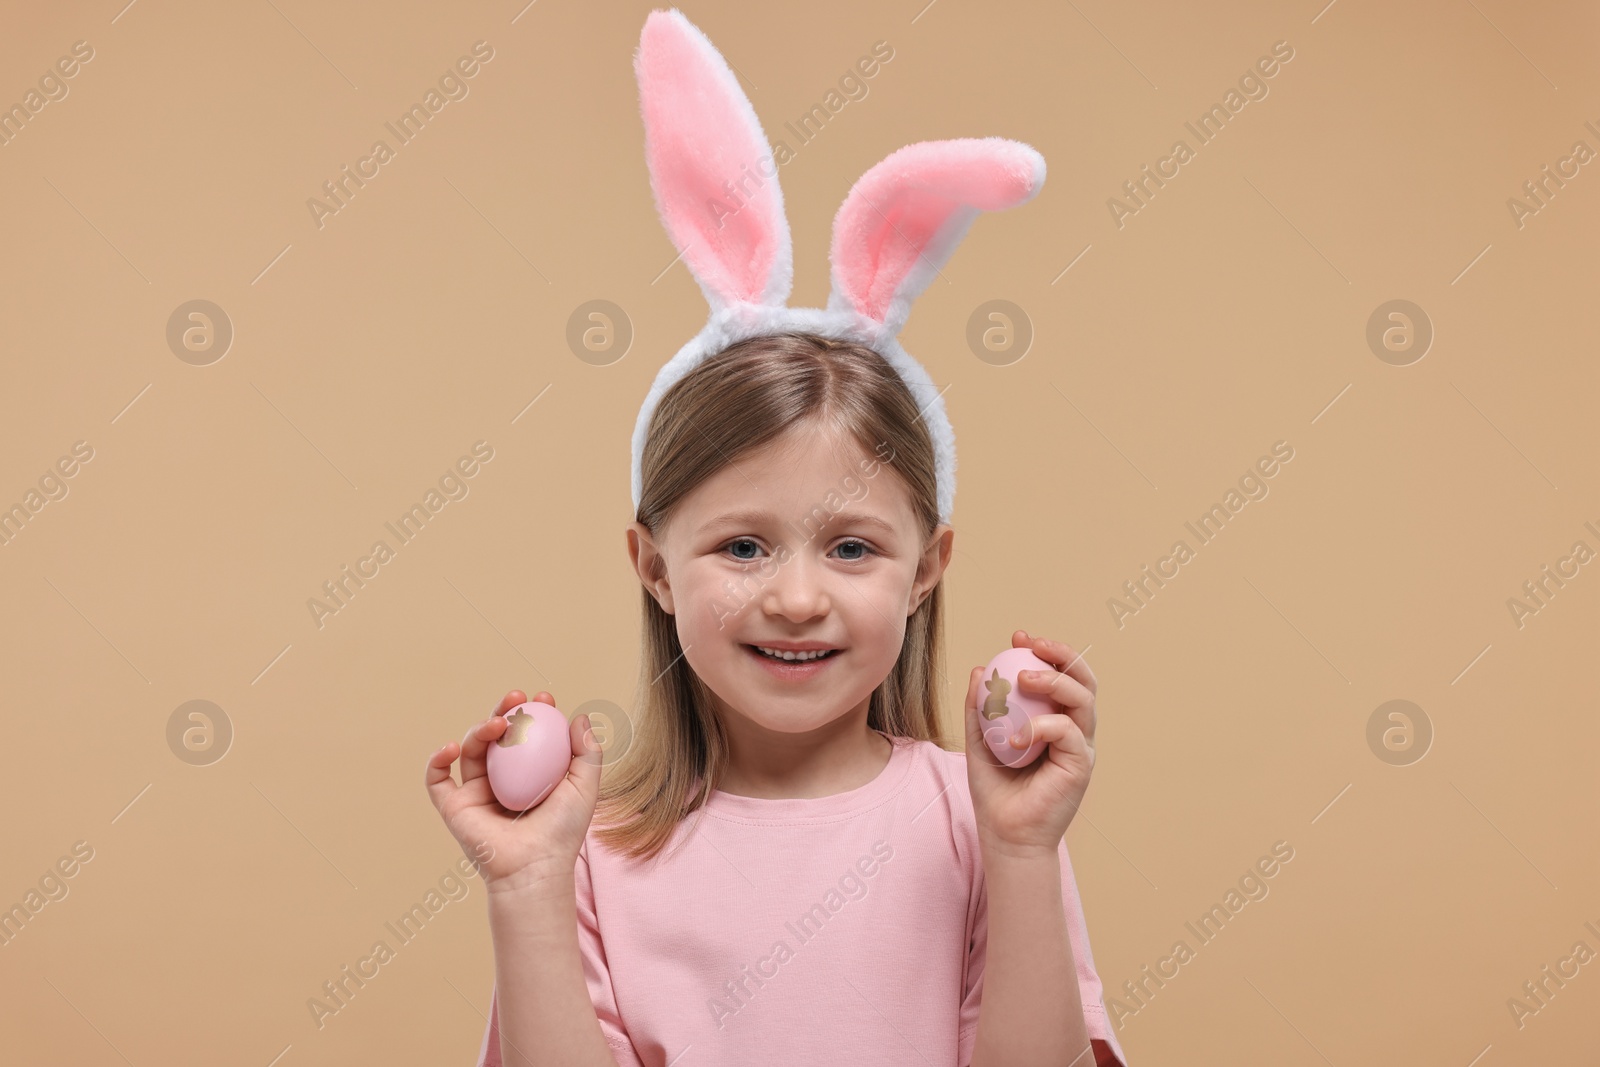 Photo of Easter celebration. Cute girl with bunny ears holding eggs on beige background